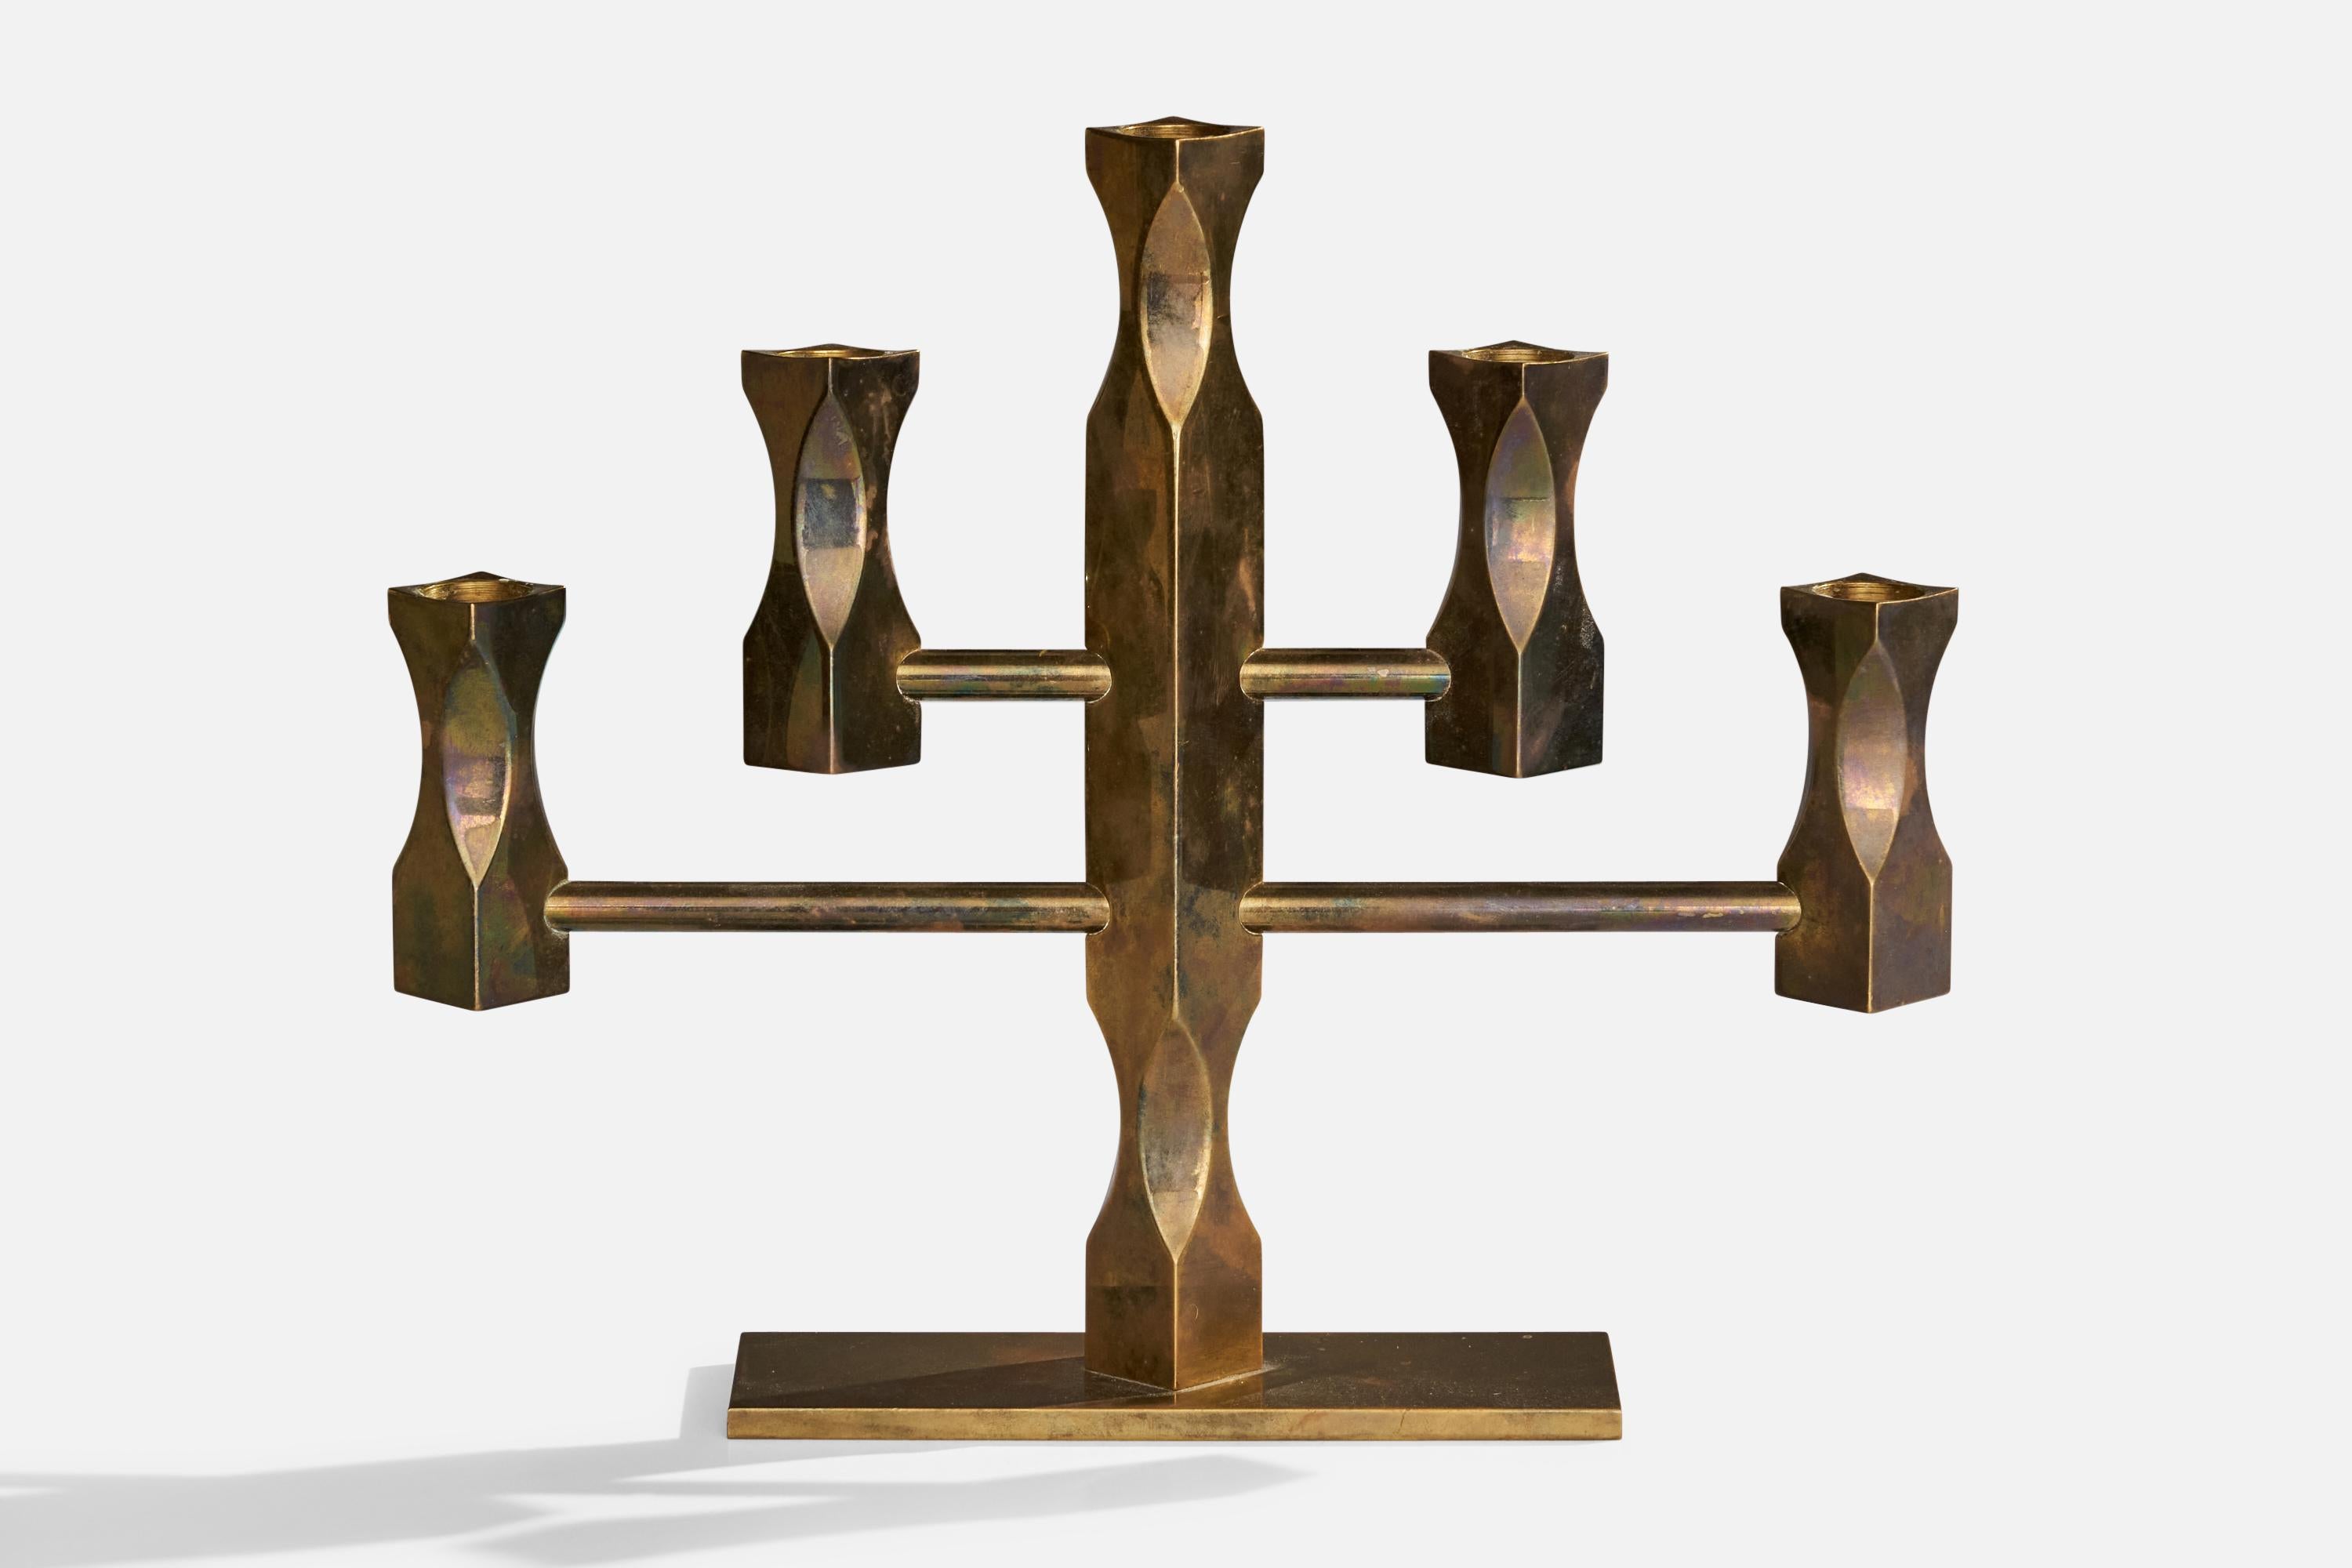 A heavy-alloy brass candelabra designed by Lars Åkesson and produced by Vallonmässing, Sweden, dated 1984.

Holds .8” candles.